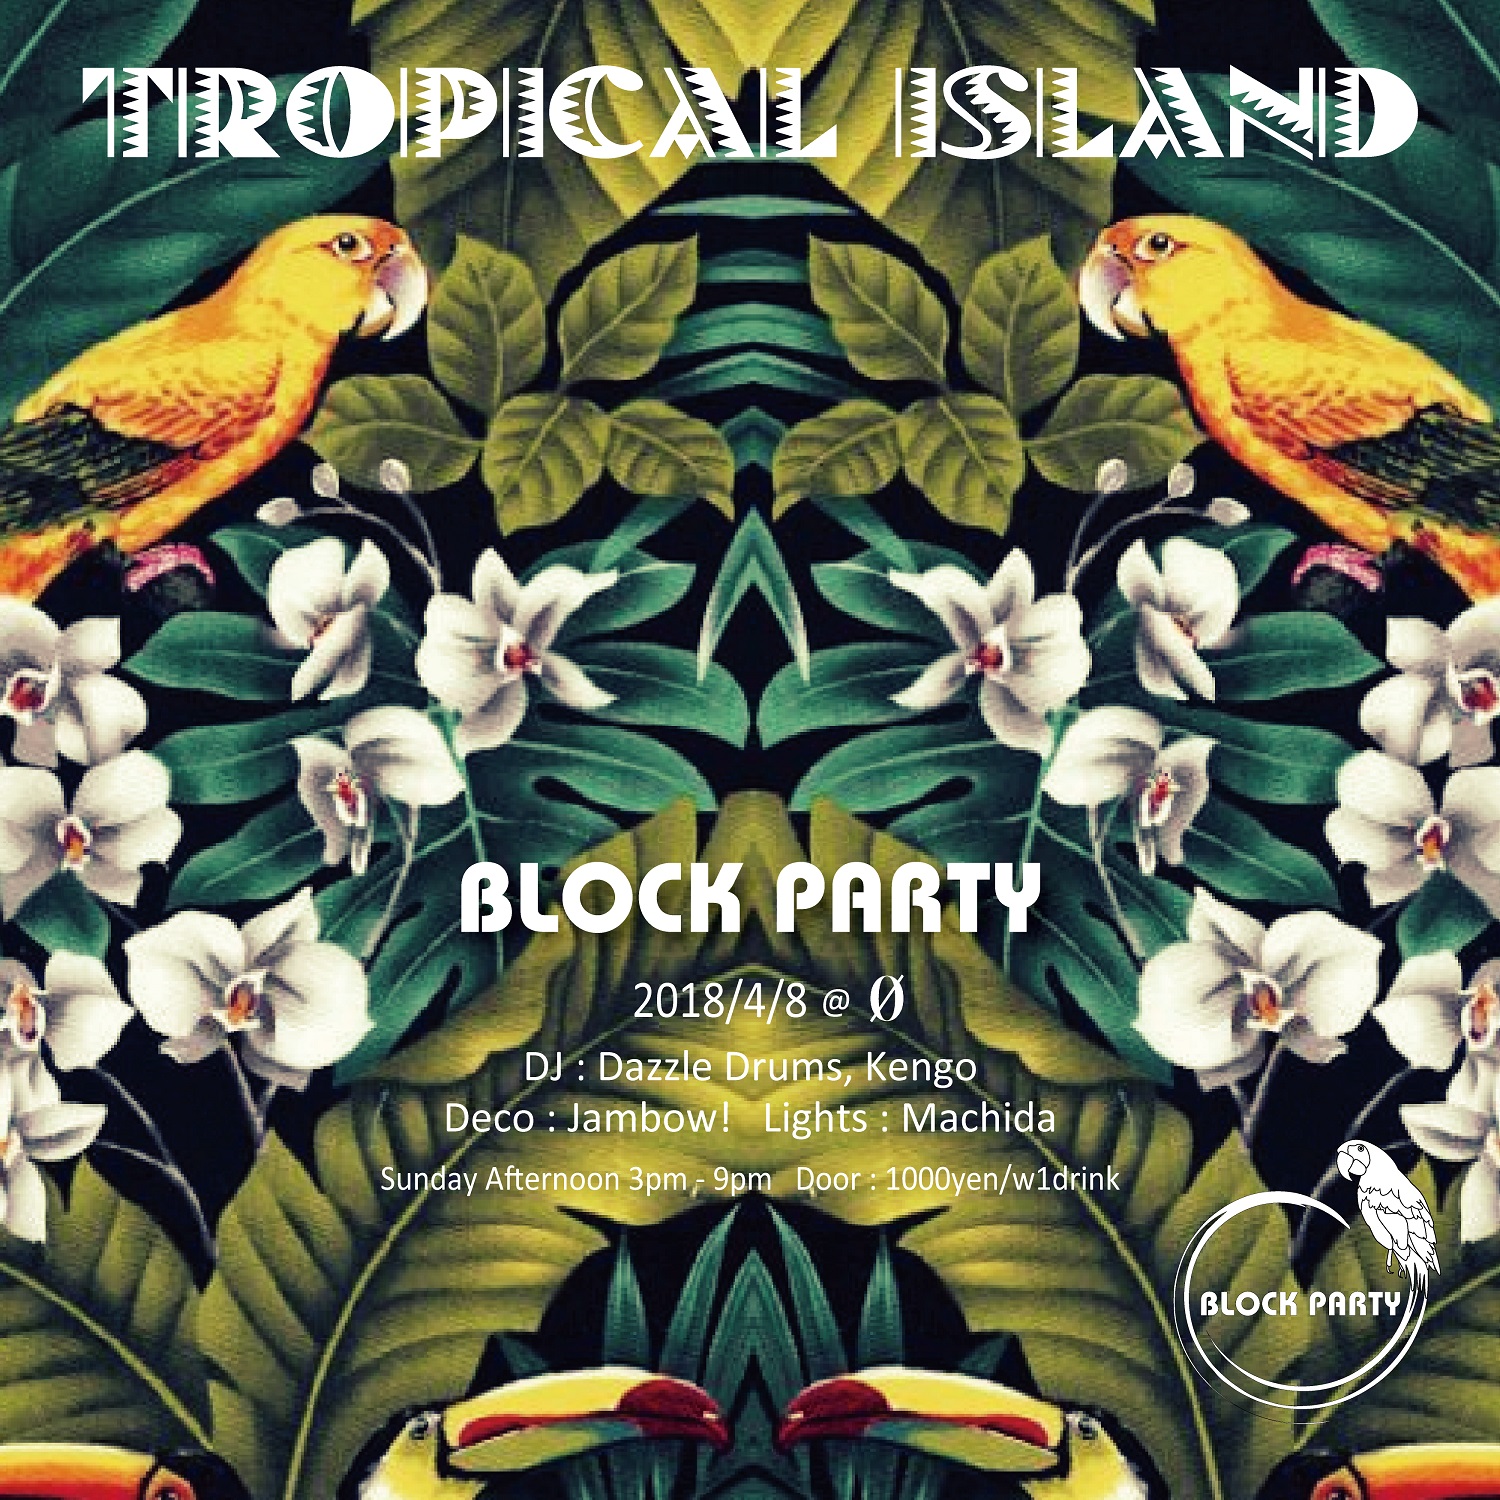 Block Party “Tropical Island”